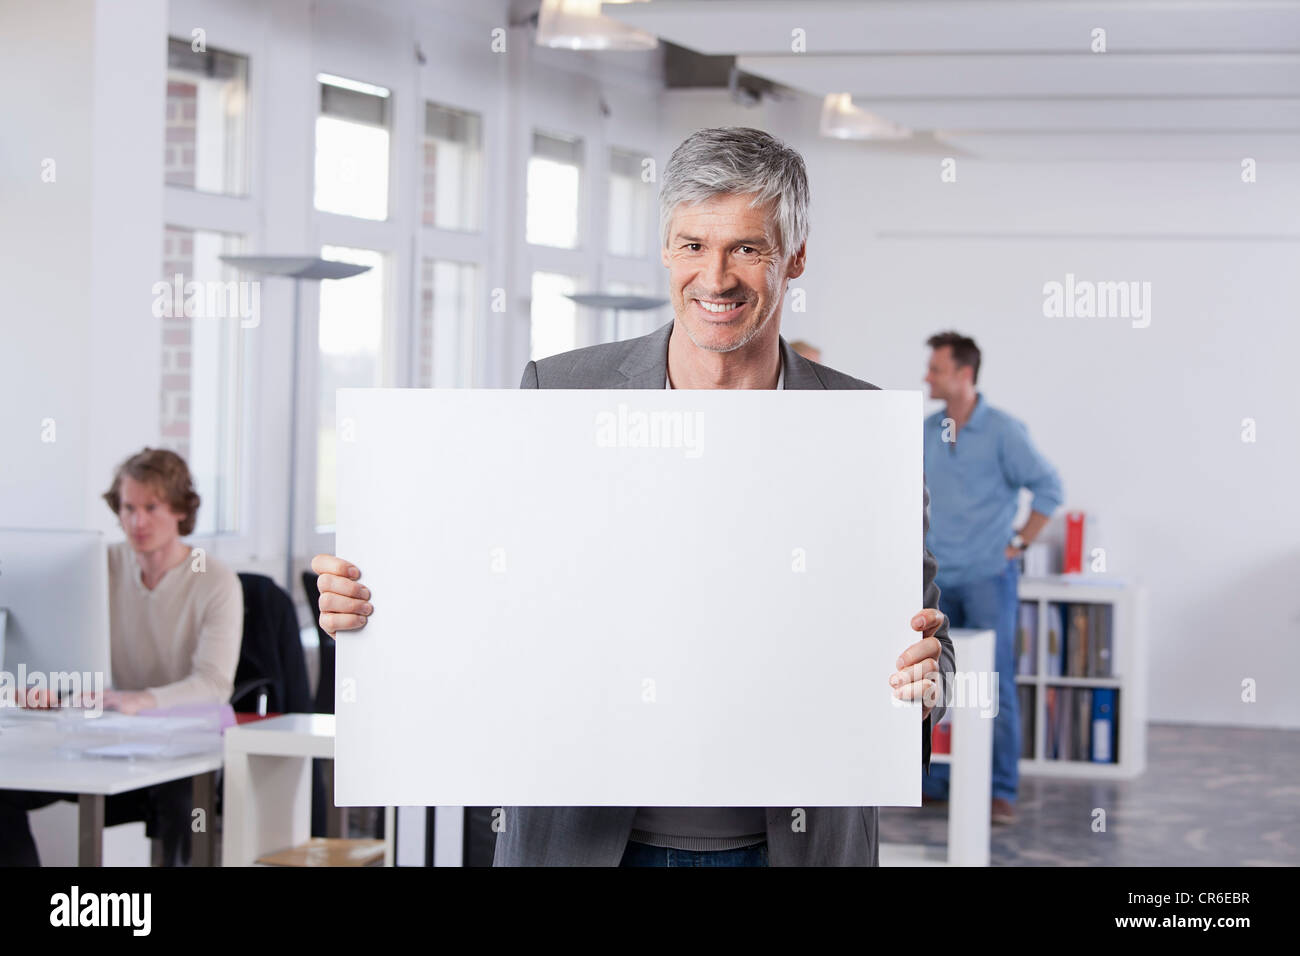 Germany, Bavaria, Munich, Mature man holding placard in office Banque D'Images